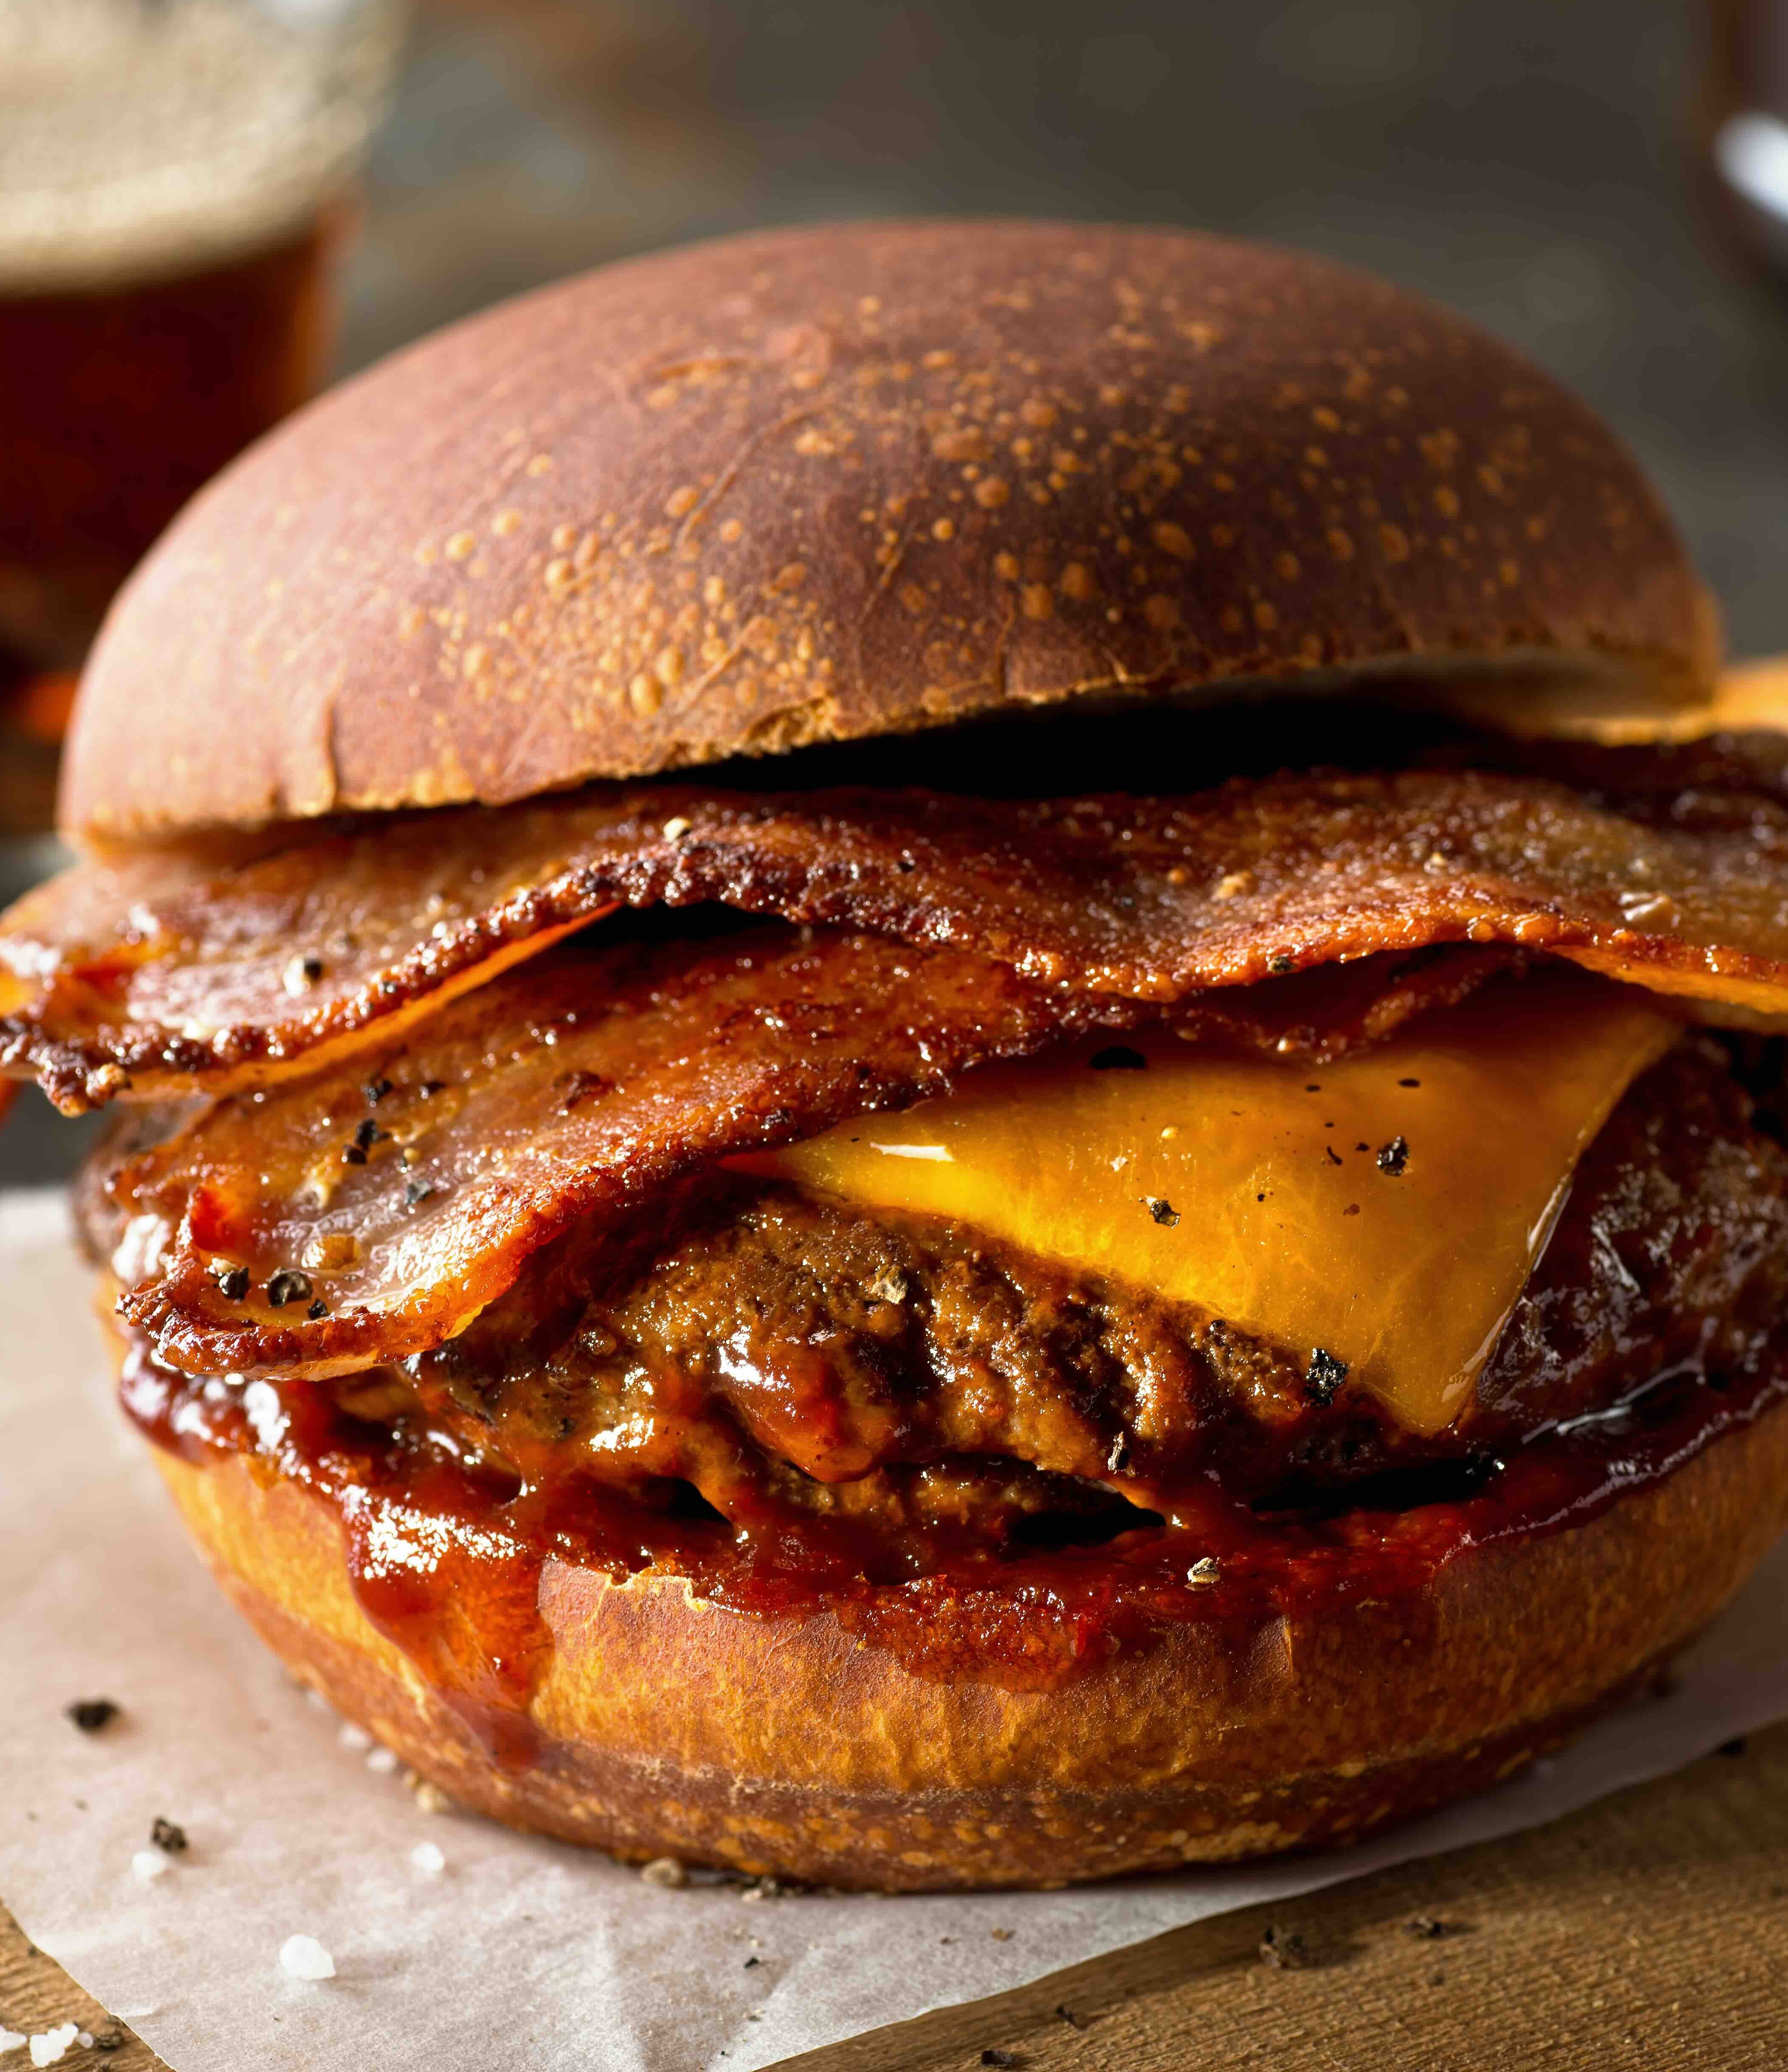 A delicious pub style bacon cheeseburger with barbecue sauce and french fries.